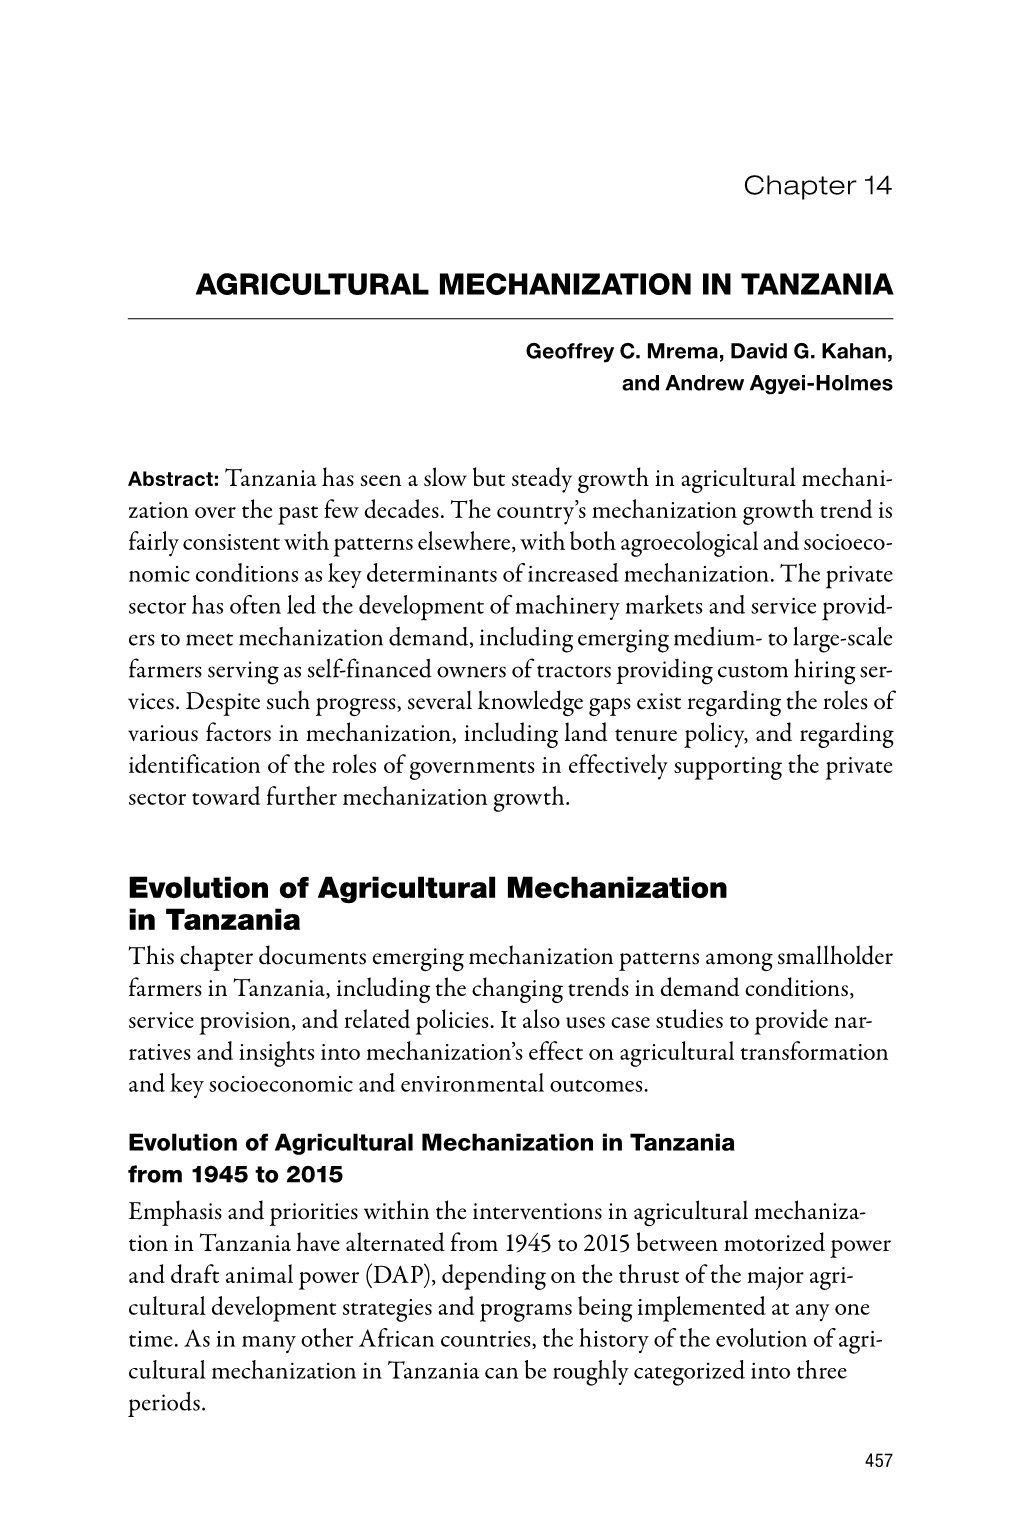 AGRICULTURAL MECHANIZATION in TANZANIA Evolution Of